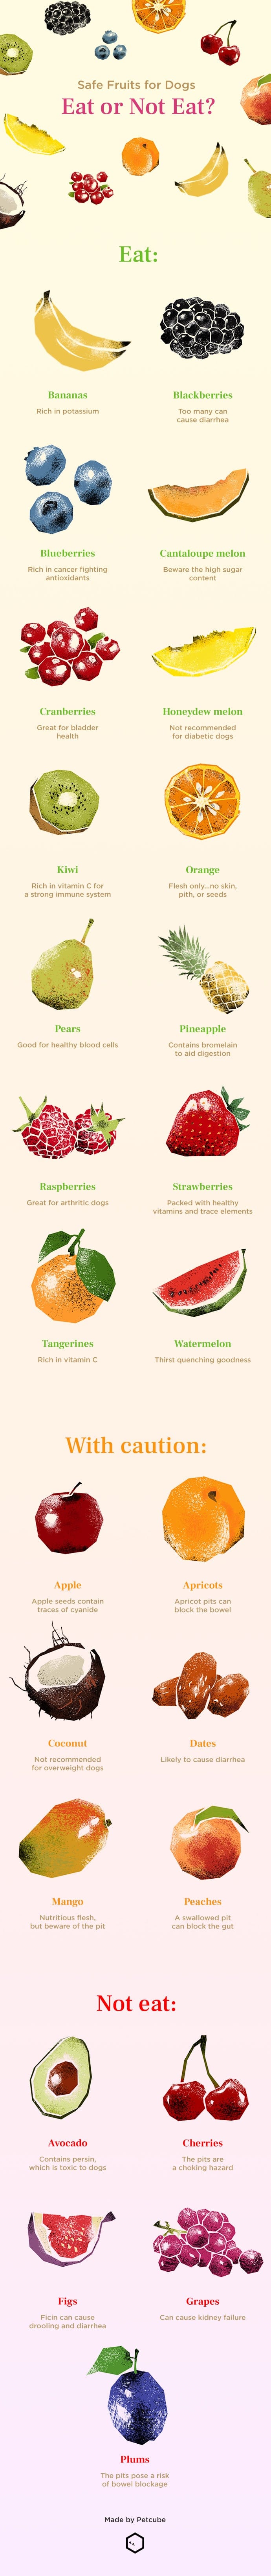 which fruits are safe for dogs to eat? discover the benefits